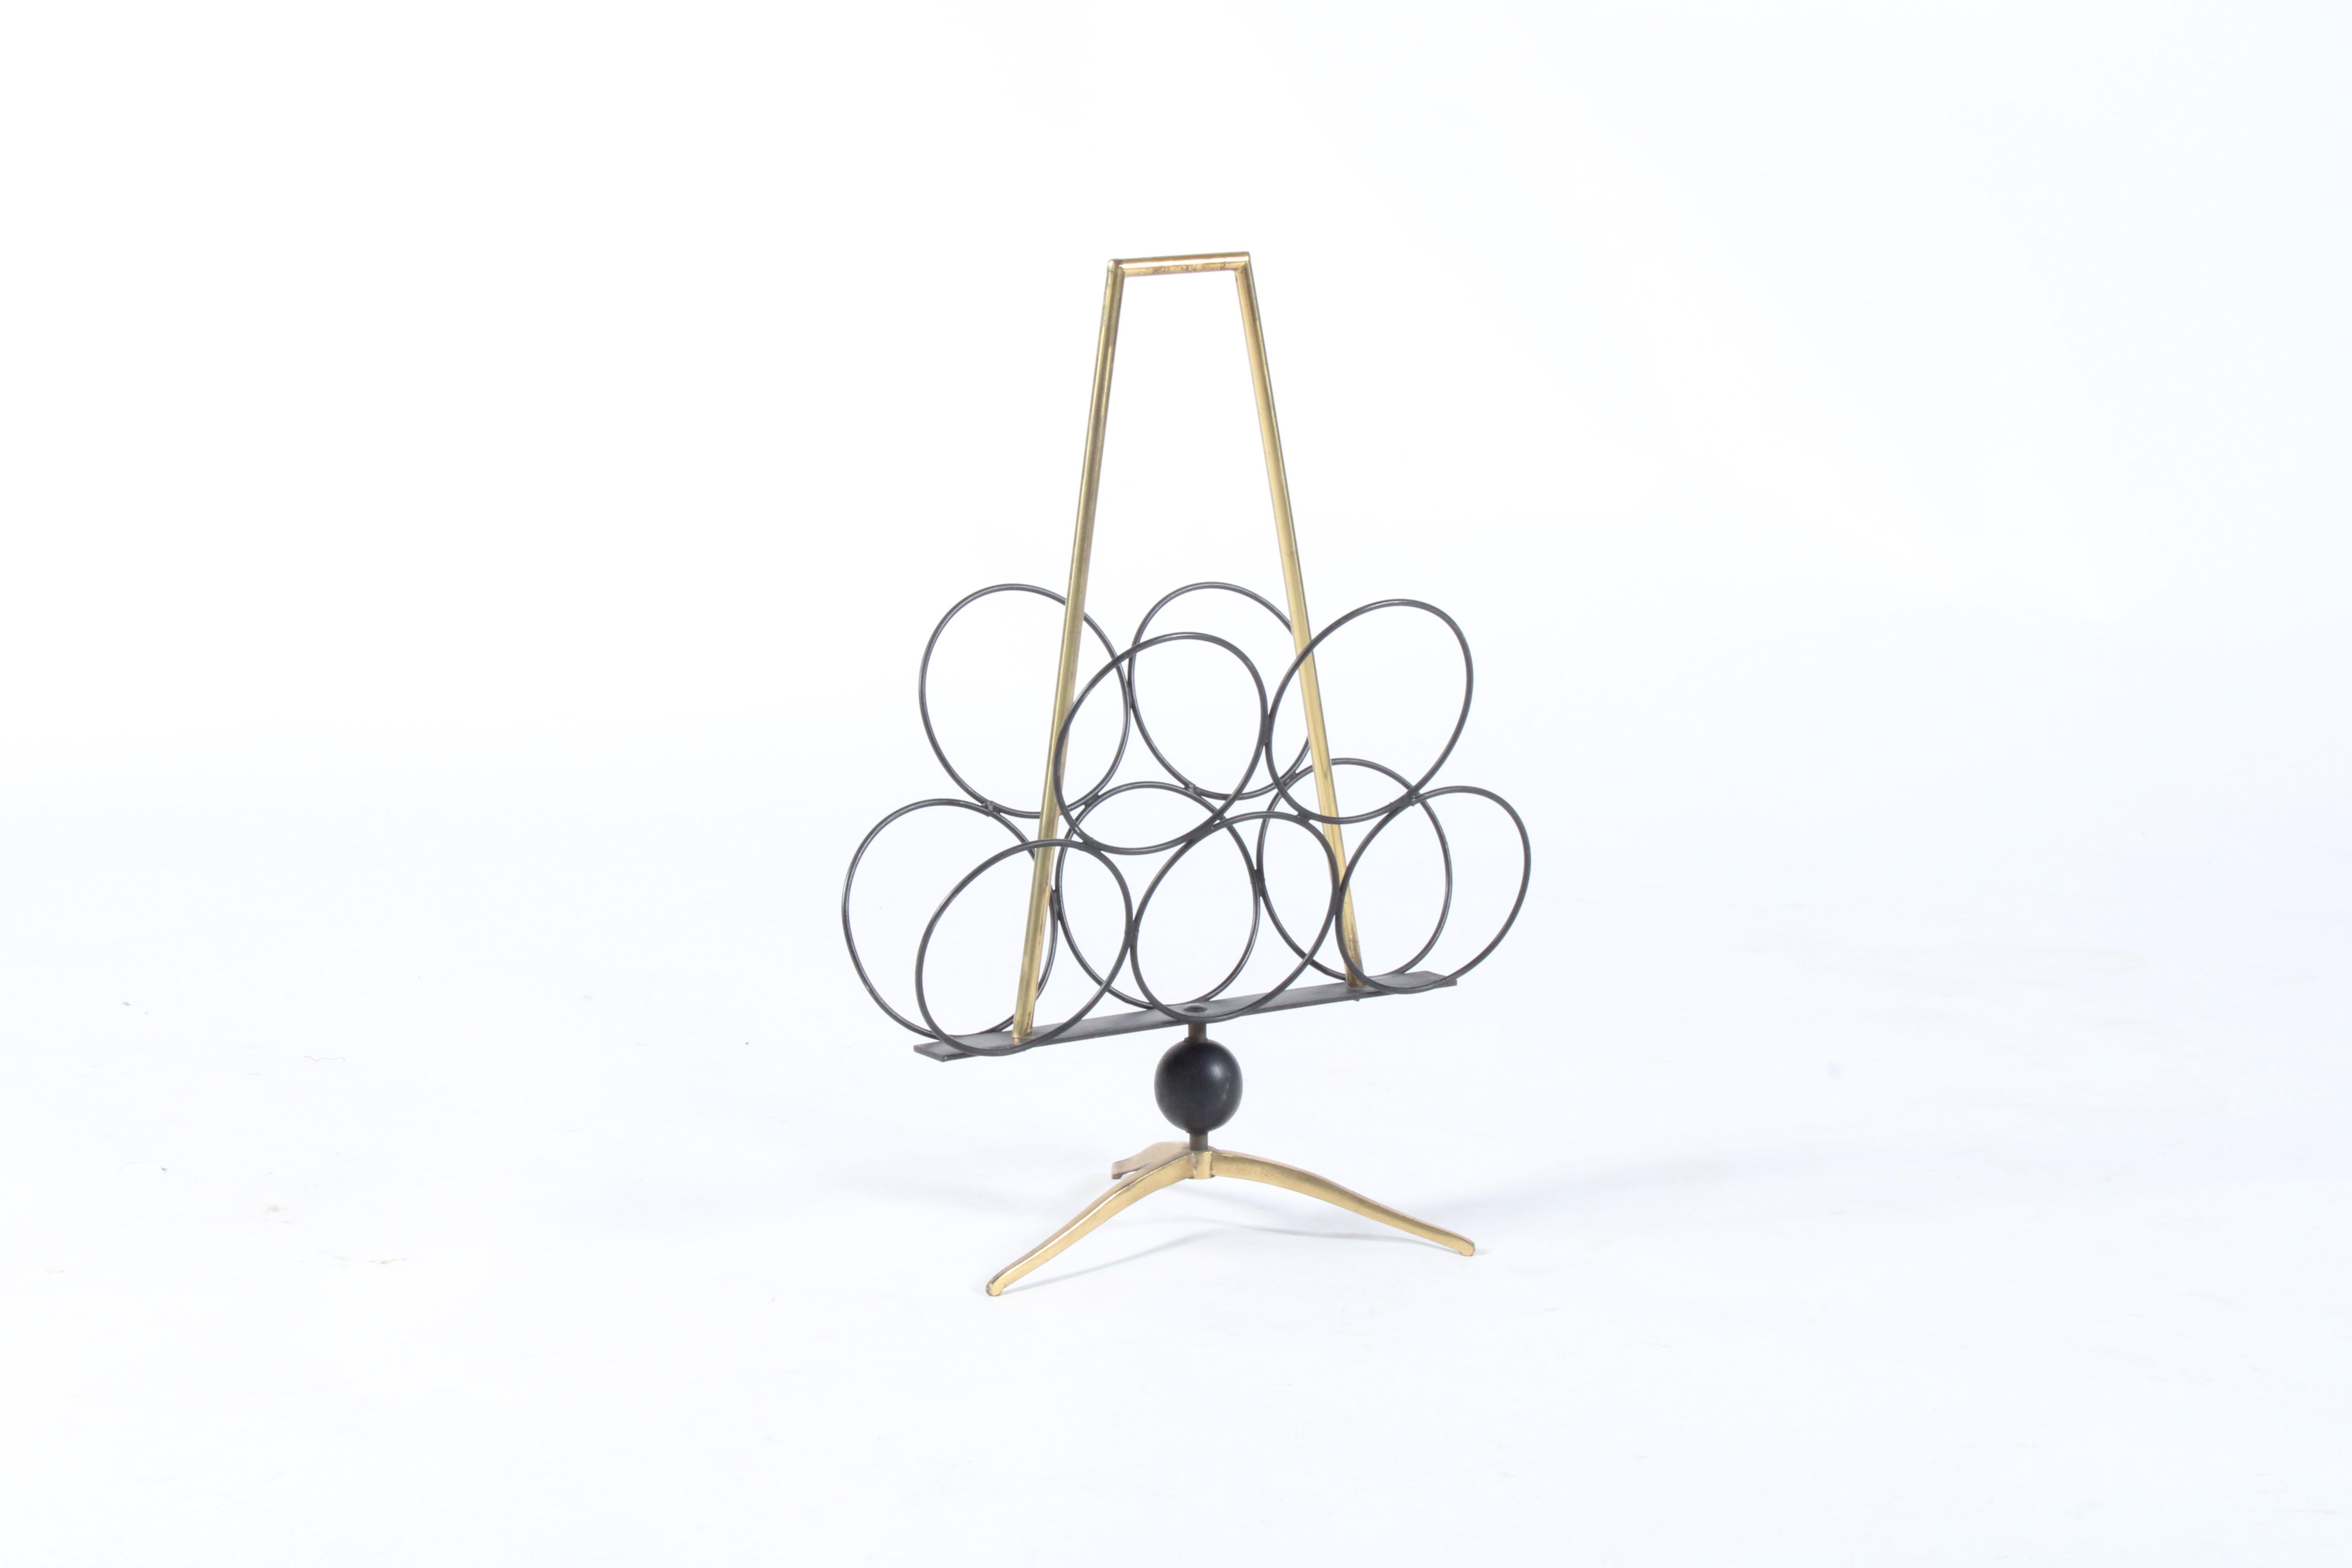 An exceptional original mid century Italian magazine rack. Hugely decorative and stylish this piece oozes mid century Italian sophistication and design. Made of welded brass on a tripod base the piece also features a decorative turned ebonized  